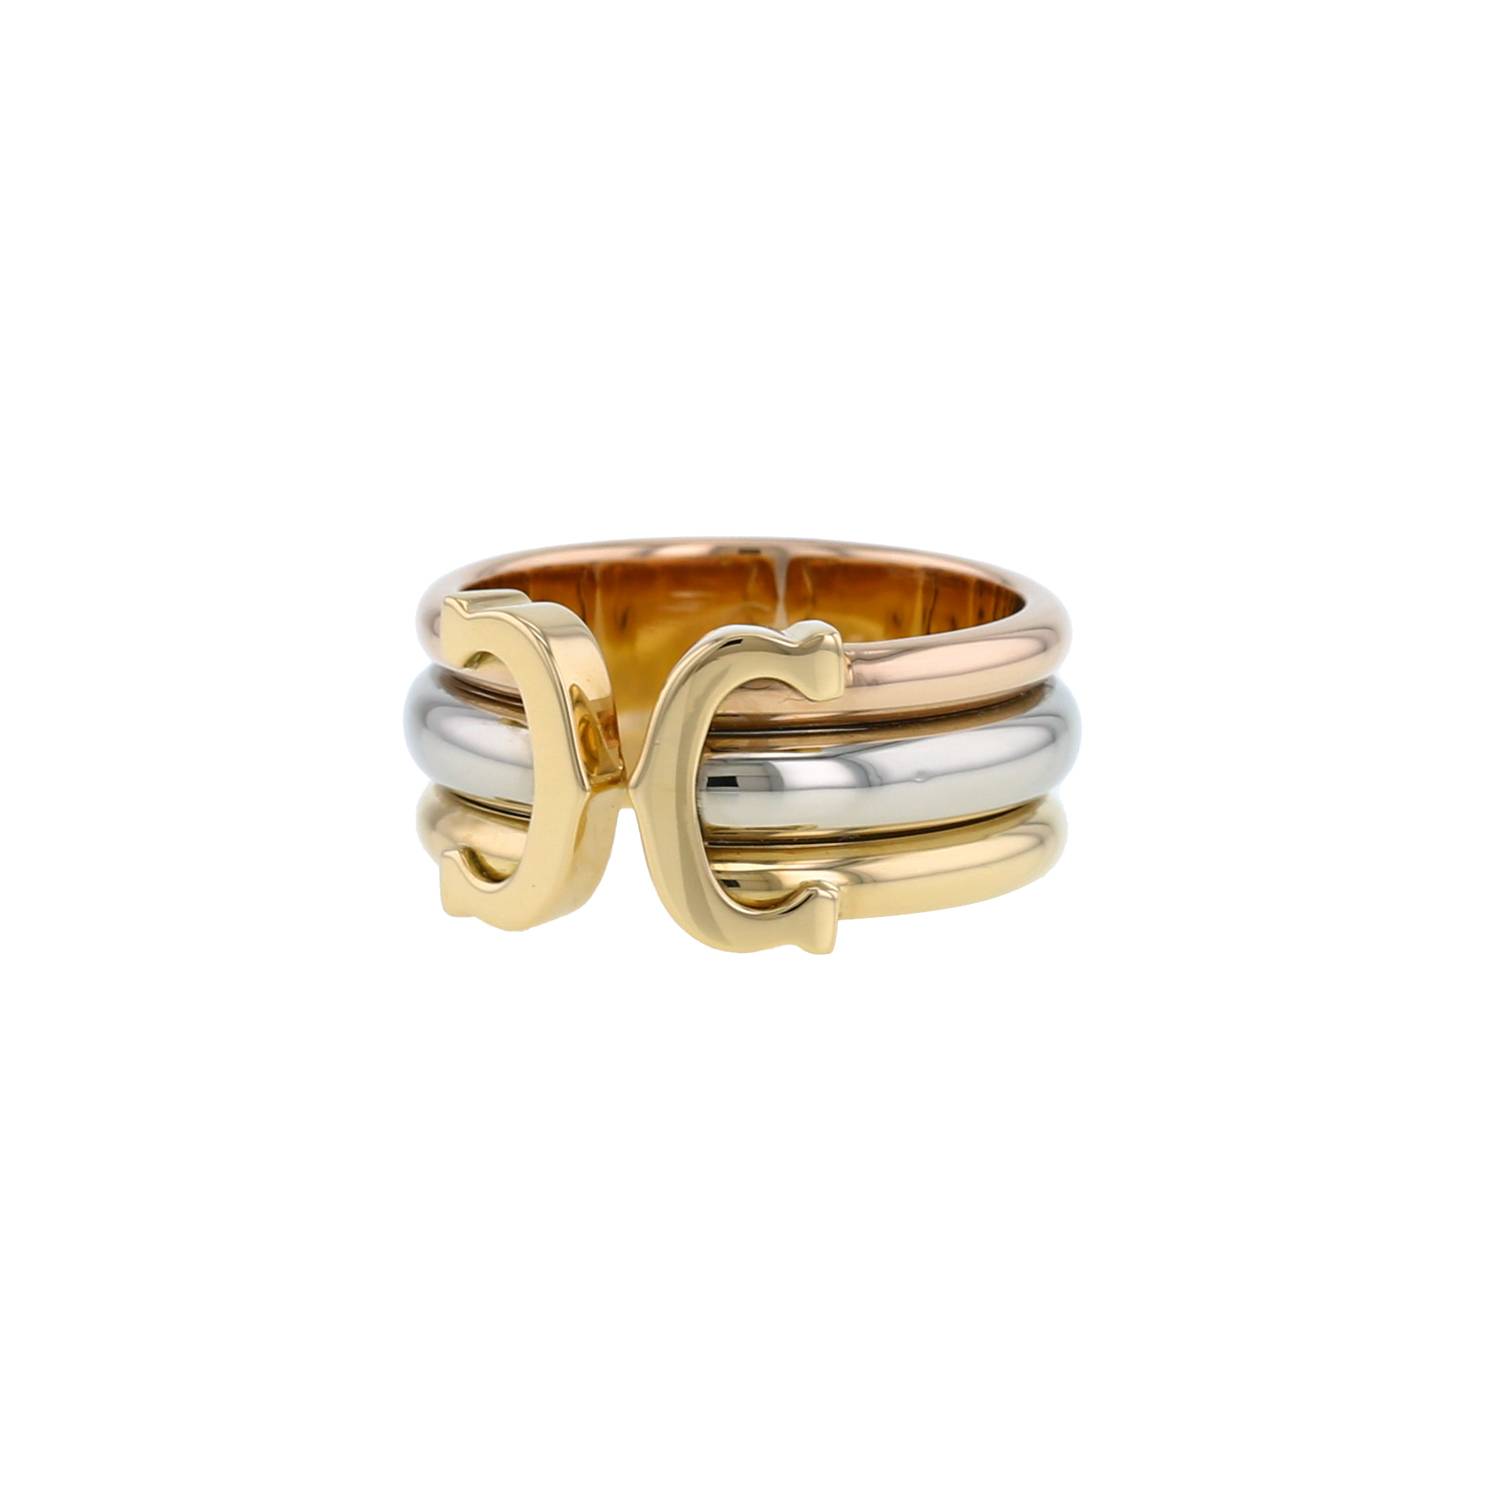 C De Ring In Yellow , Pink And